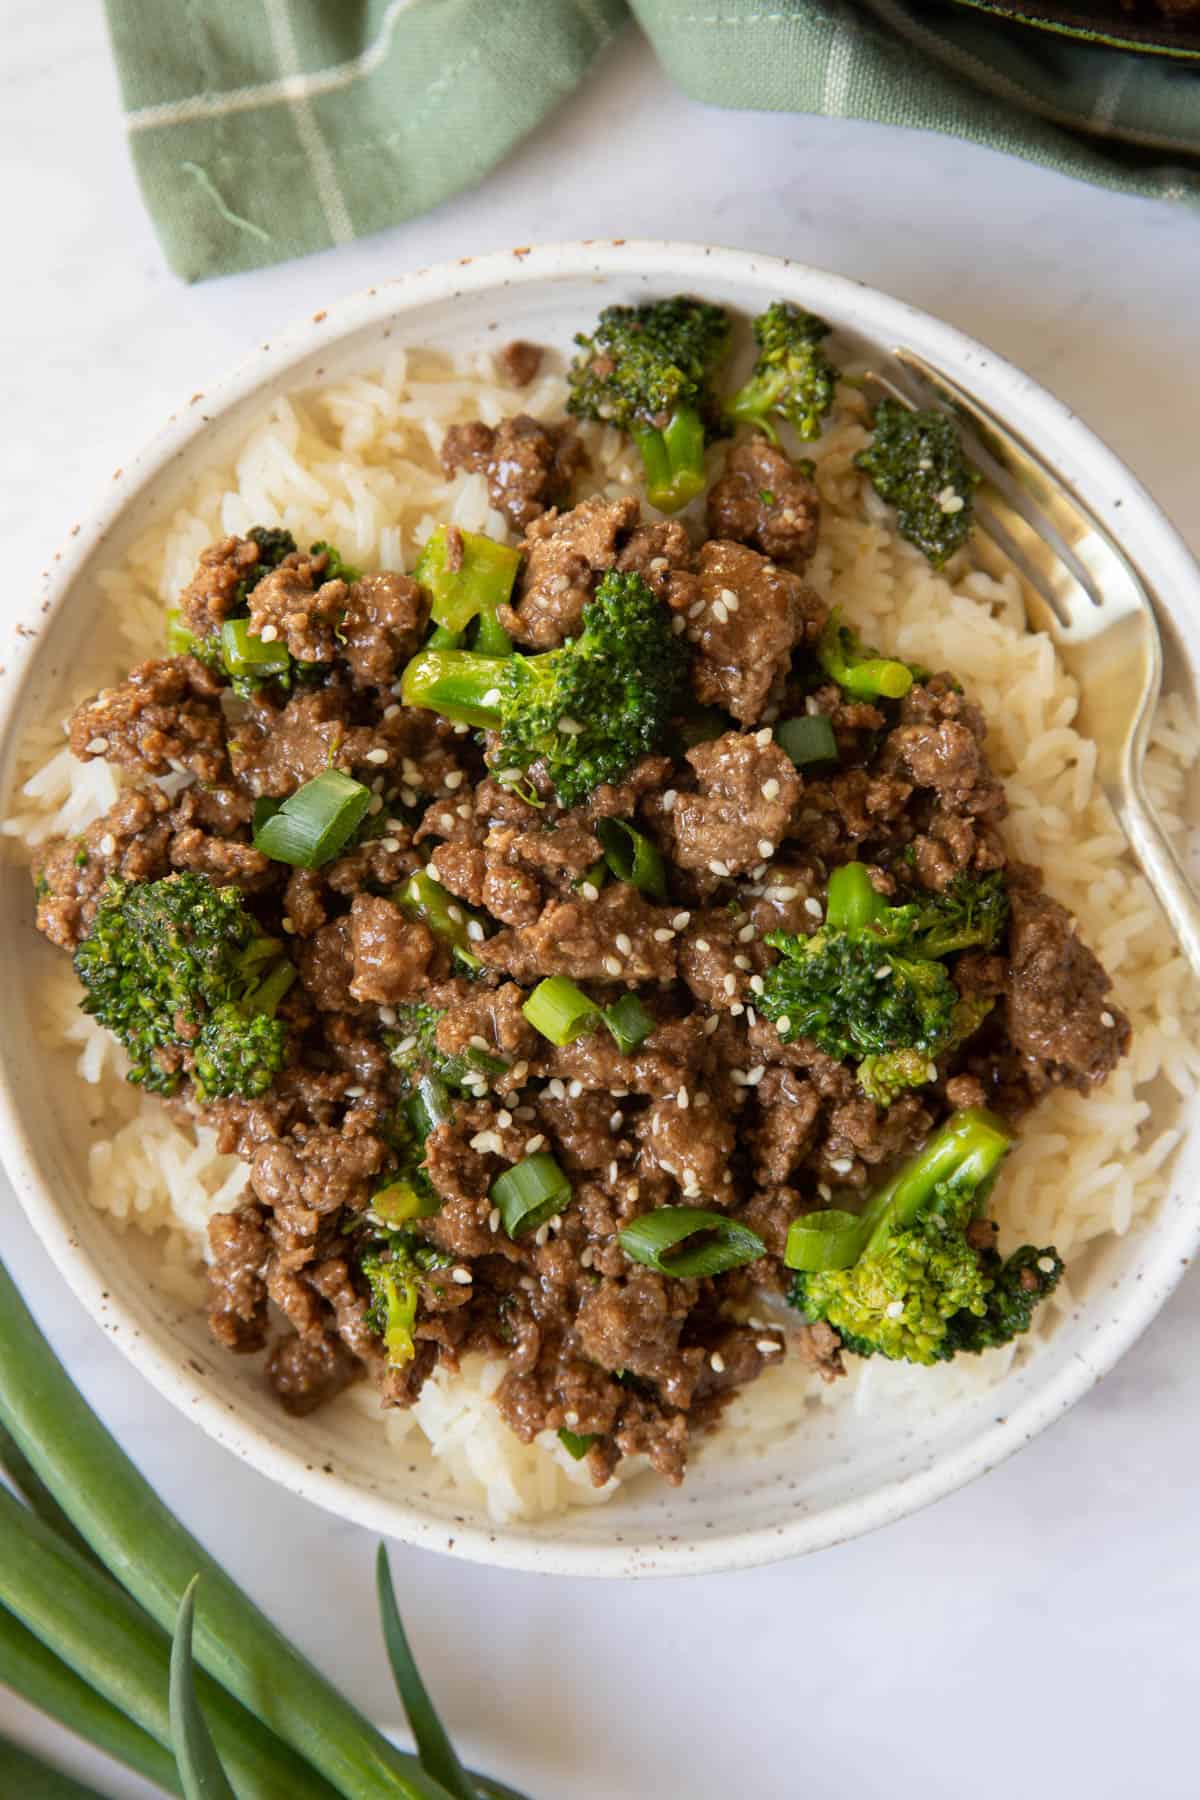 Ground beef and broccoli served on a white plate with a gold fork. Sesame seeds and sliced green onions are sprinkled on top for garnish.